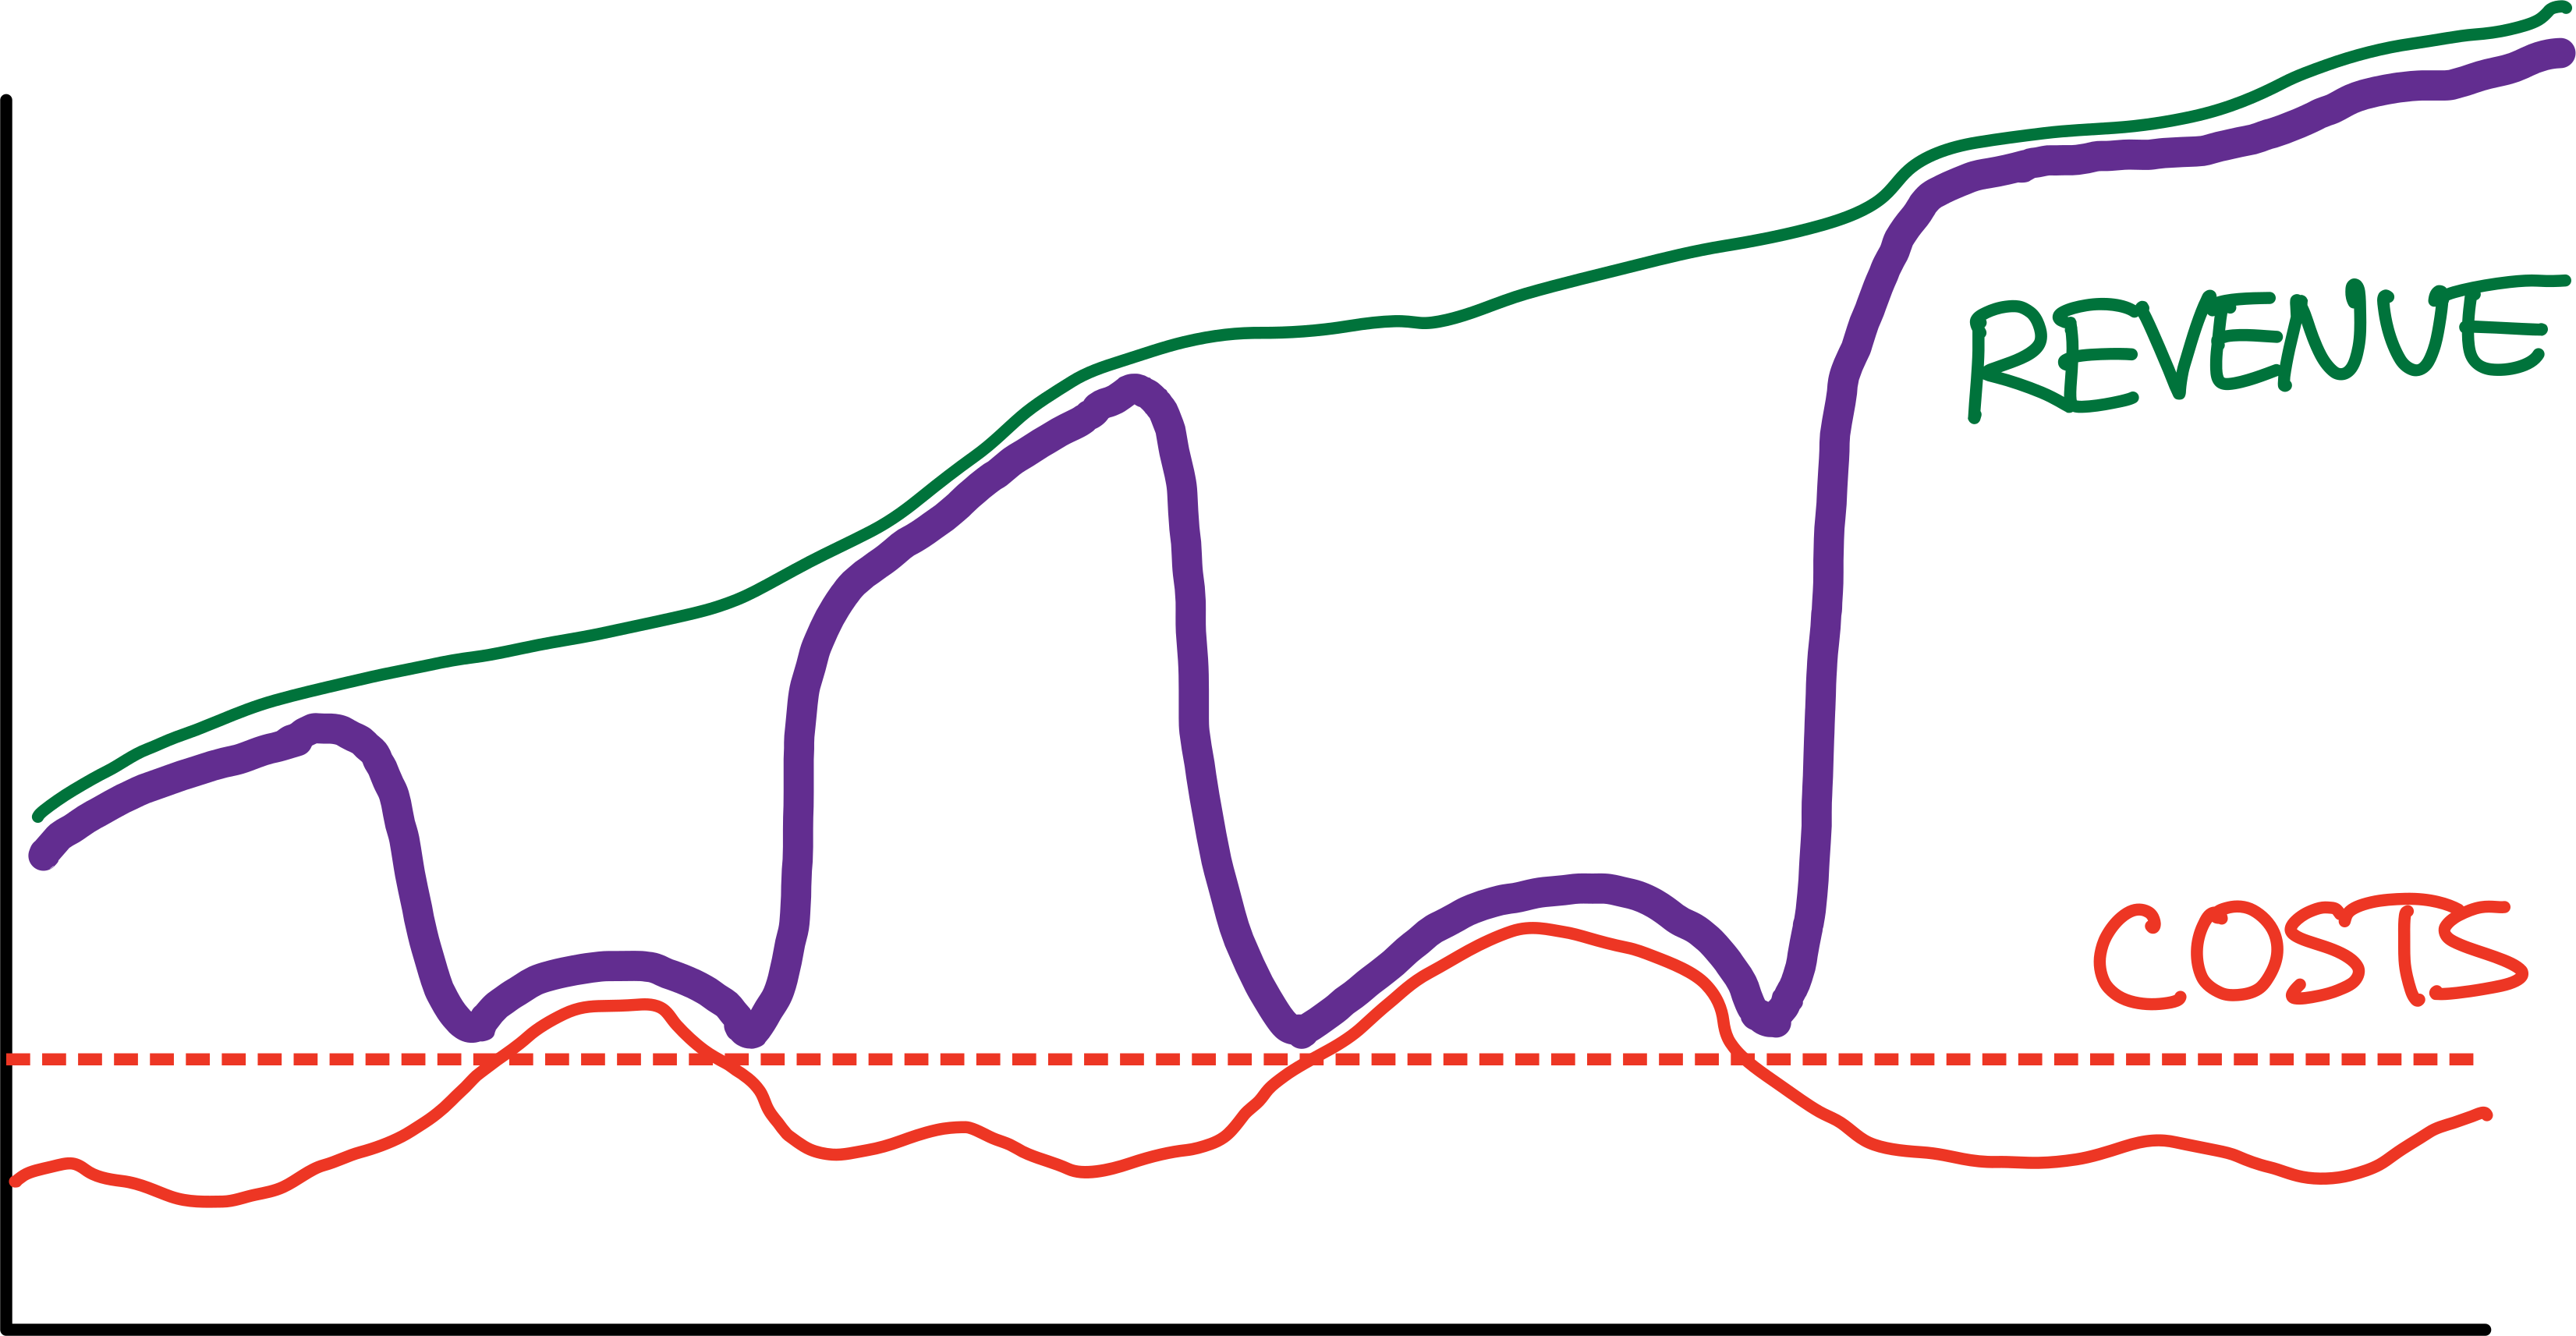 The purple line follows our attention over time: Mostly on revenue, but jumps over to costs when they grow beyond our pre-agreed threshold.